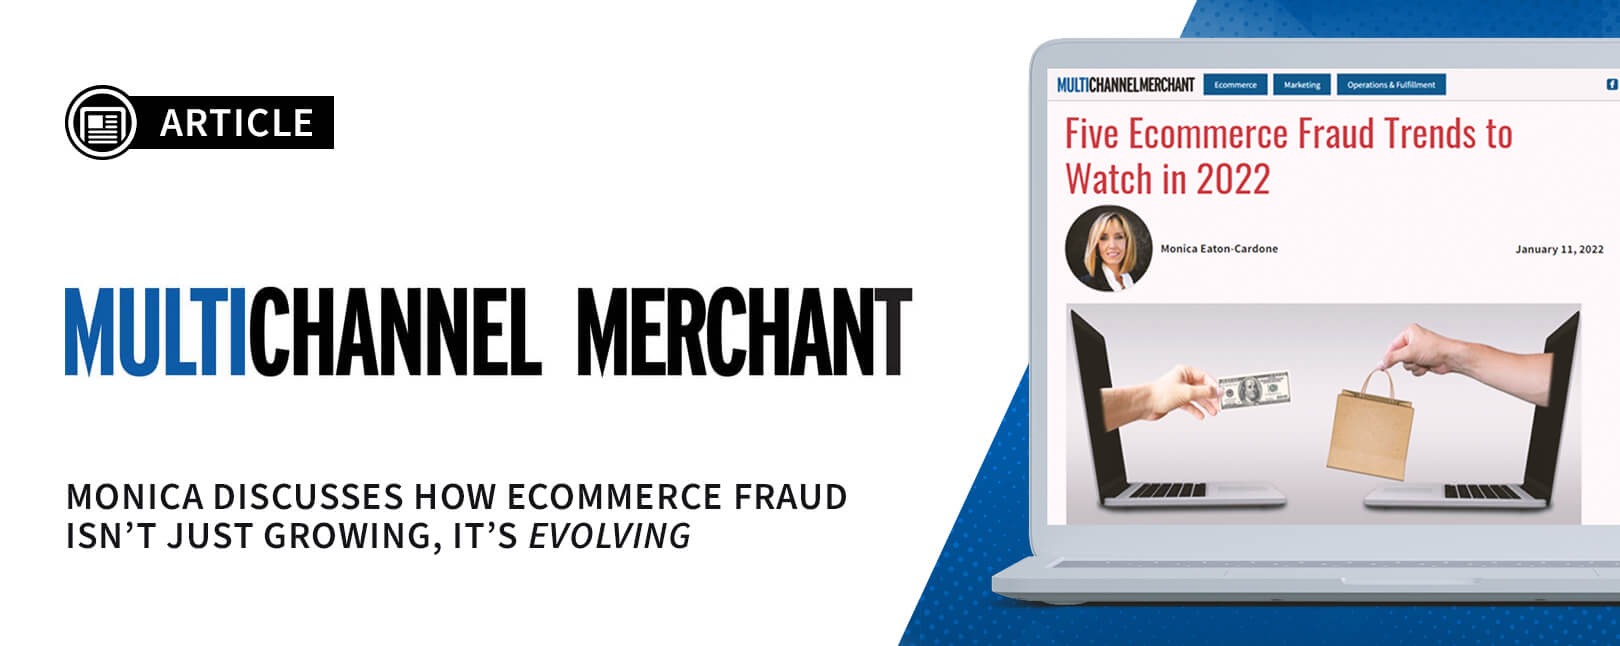 Five eCommerce Fraud Trends to Watch in 2022